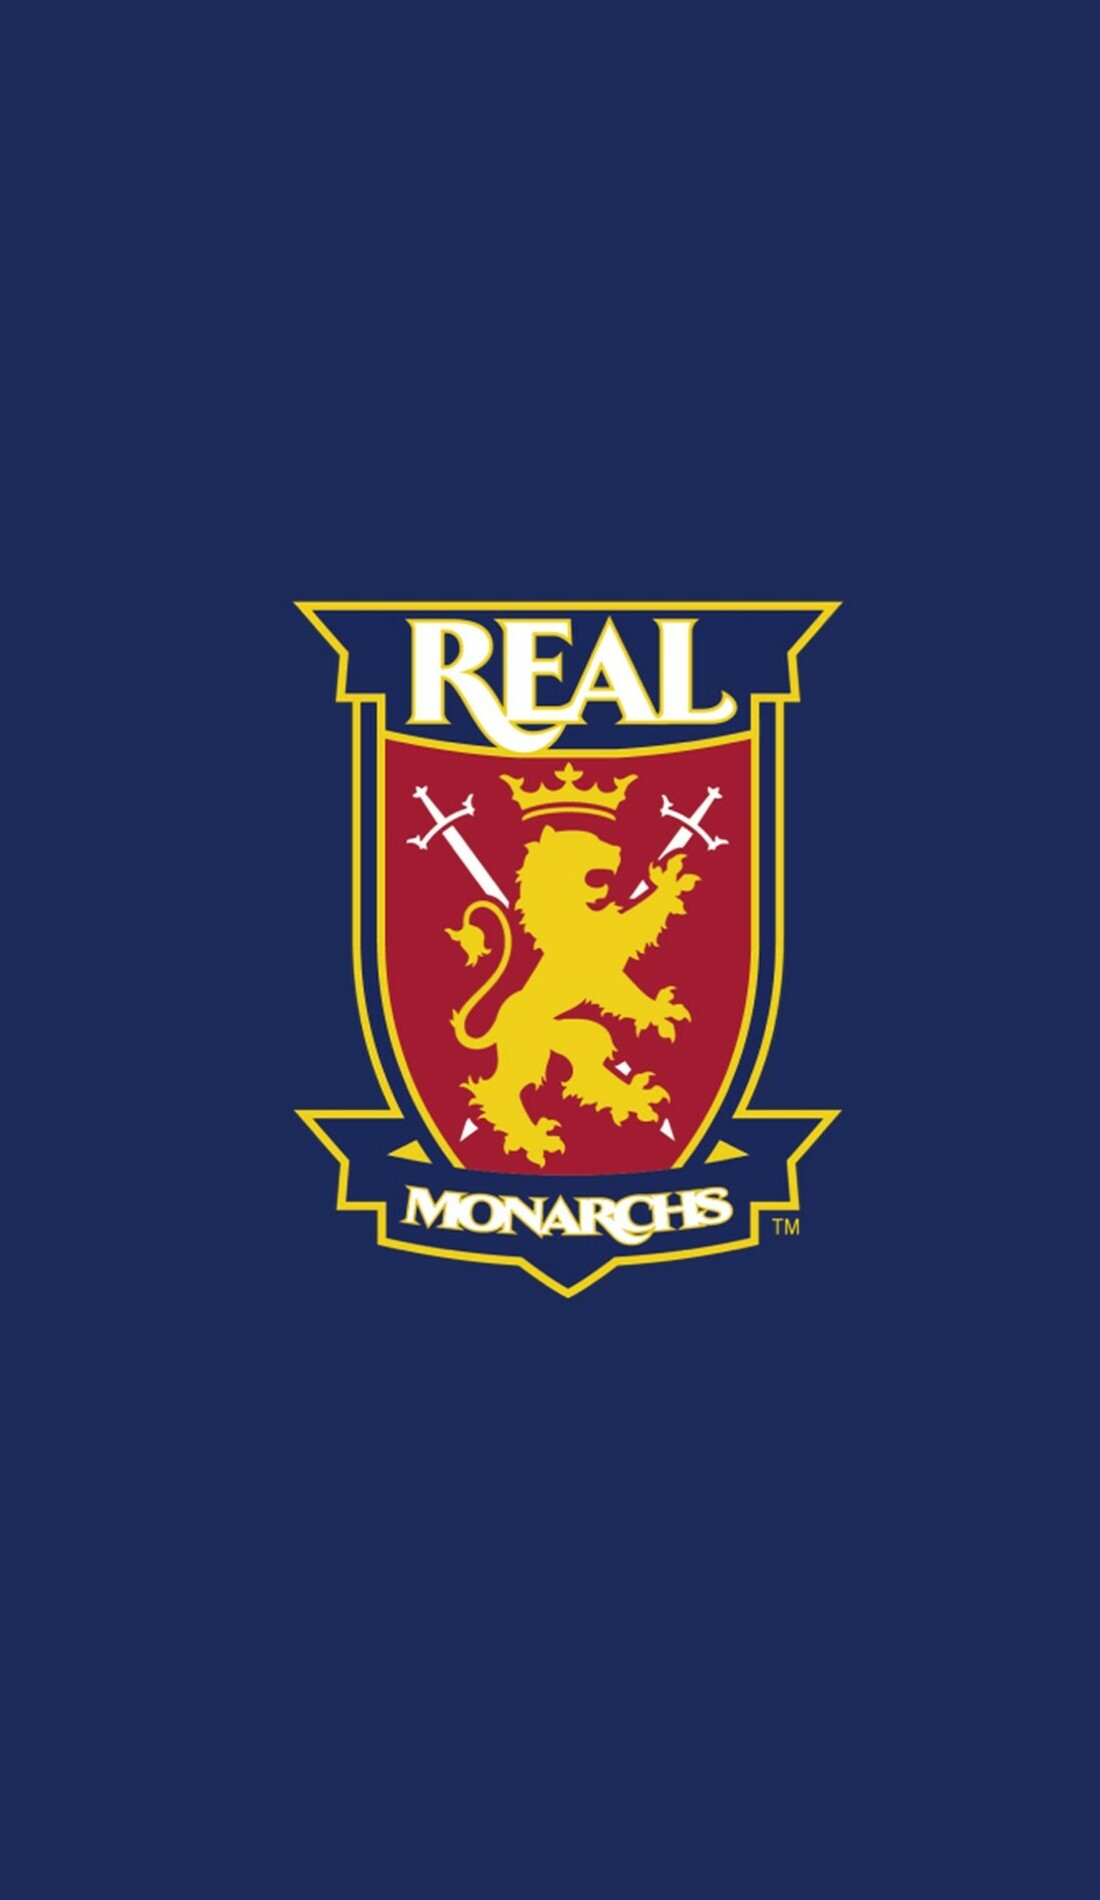 A Real Monarchs live event